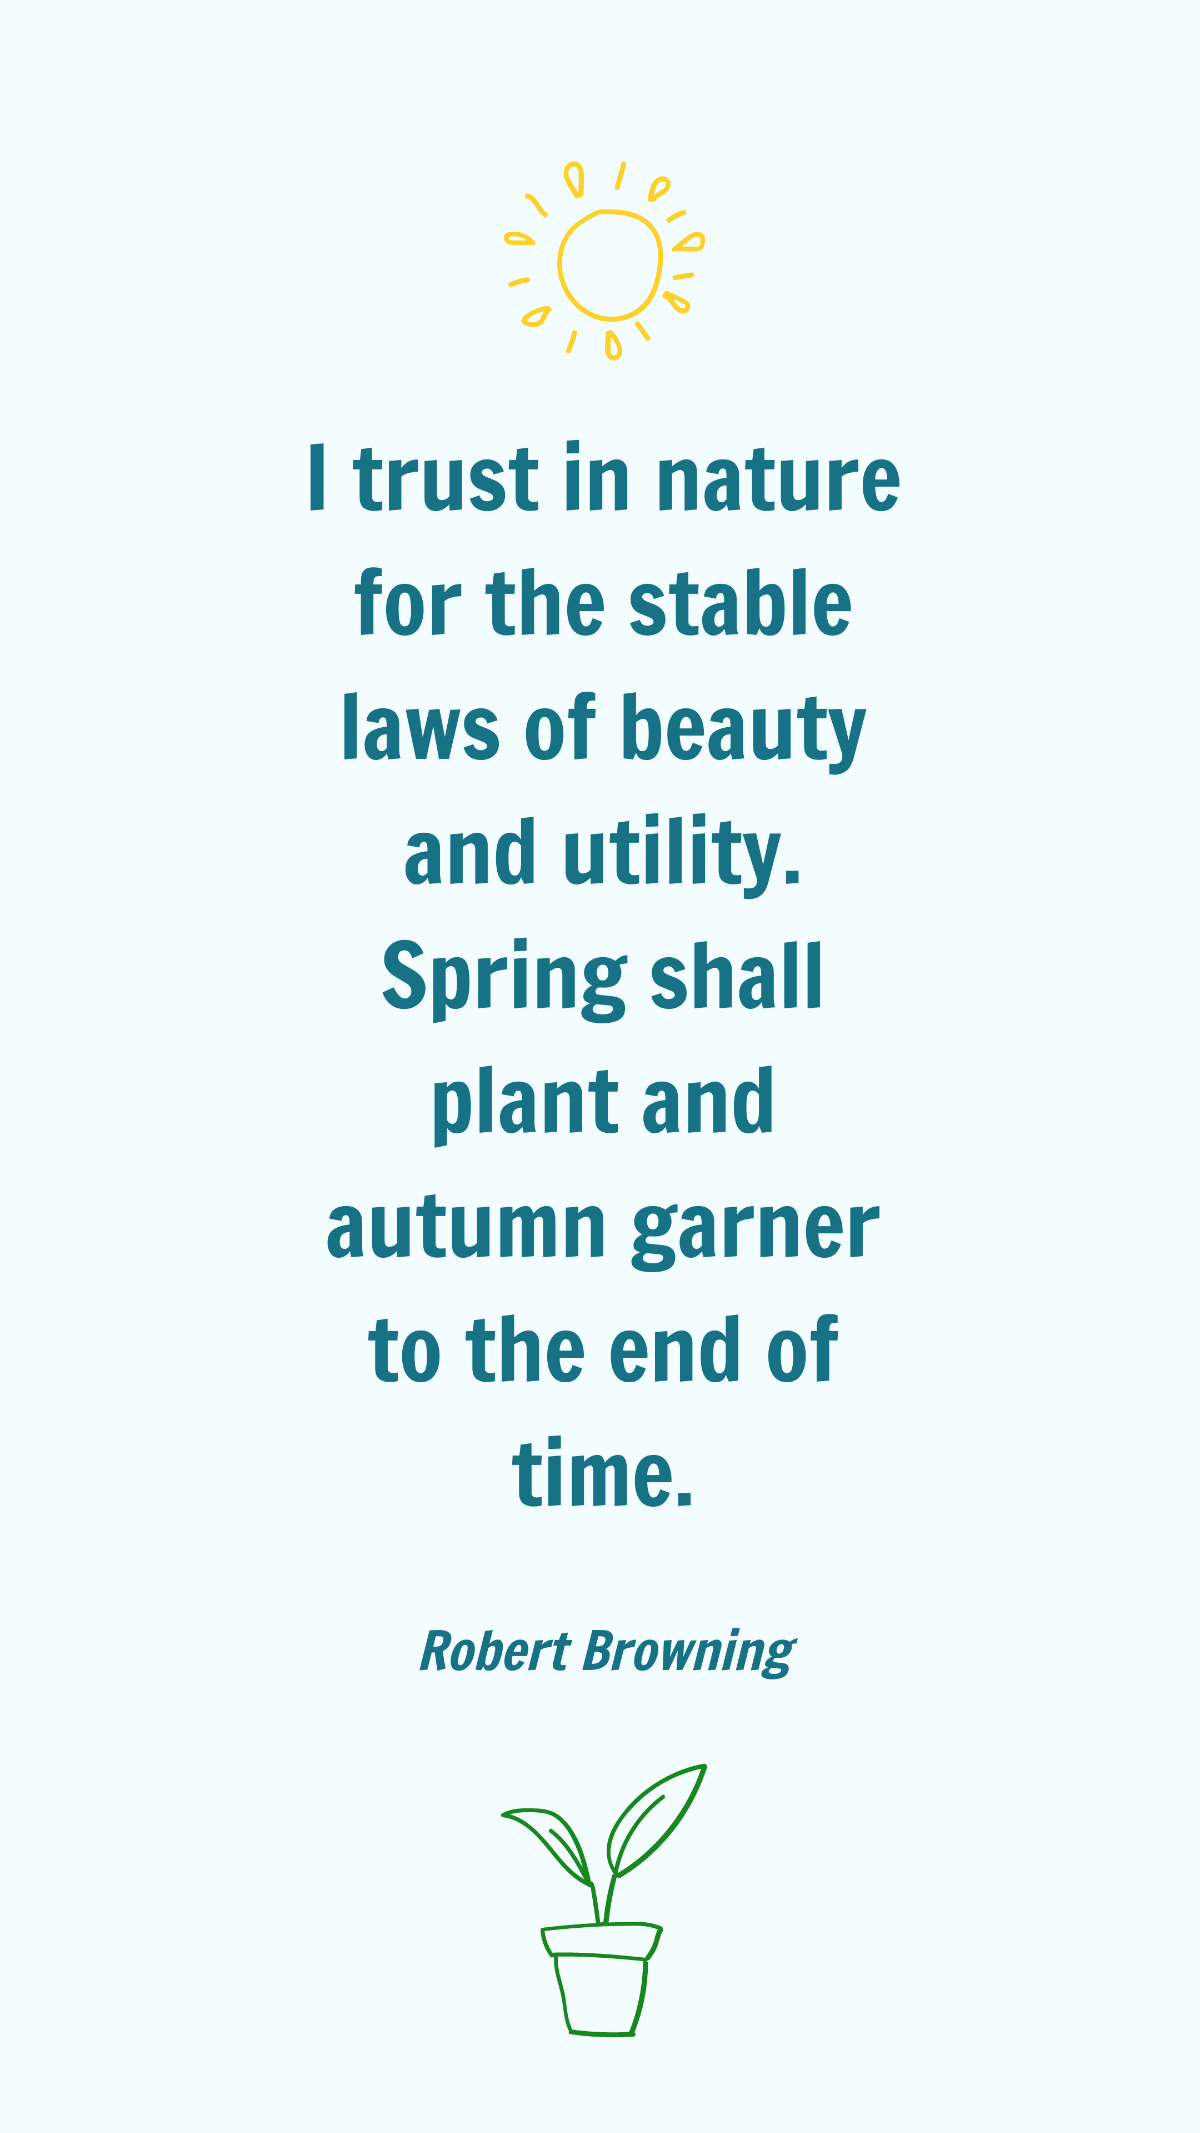 Free Robert Browning - I trust in nature for the stable laws of beauty and utility. Spring shall plant and autumn garner to the end of time. Template